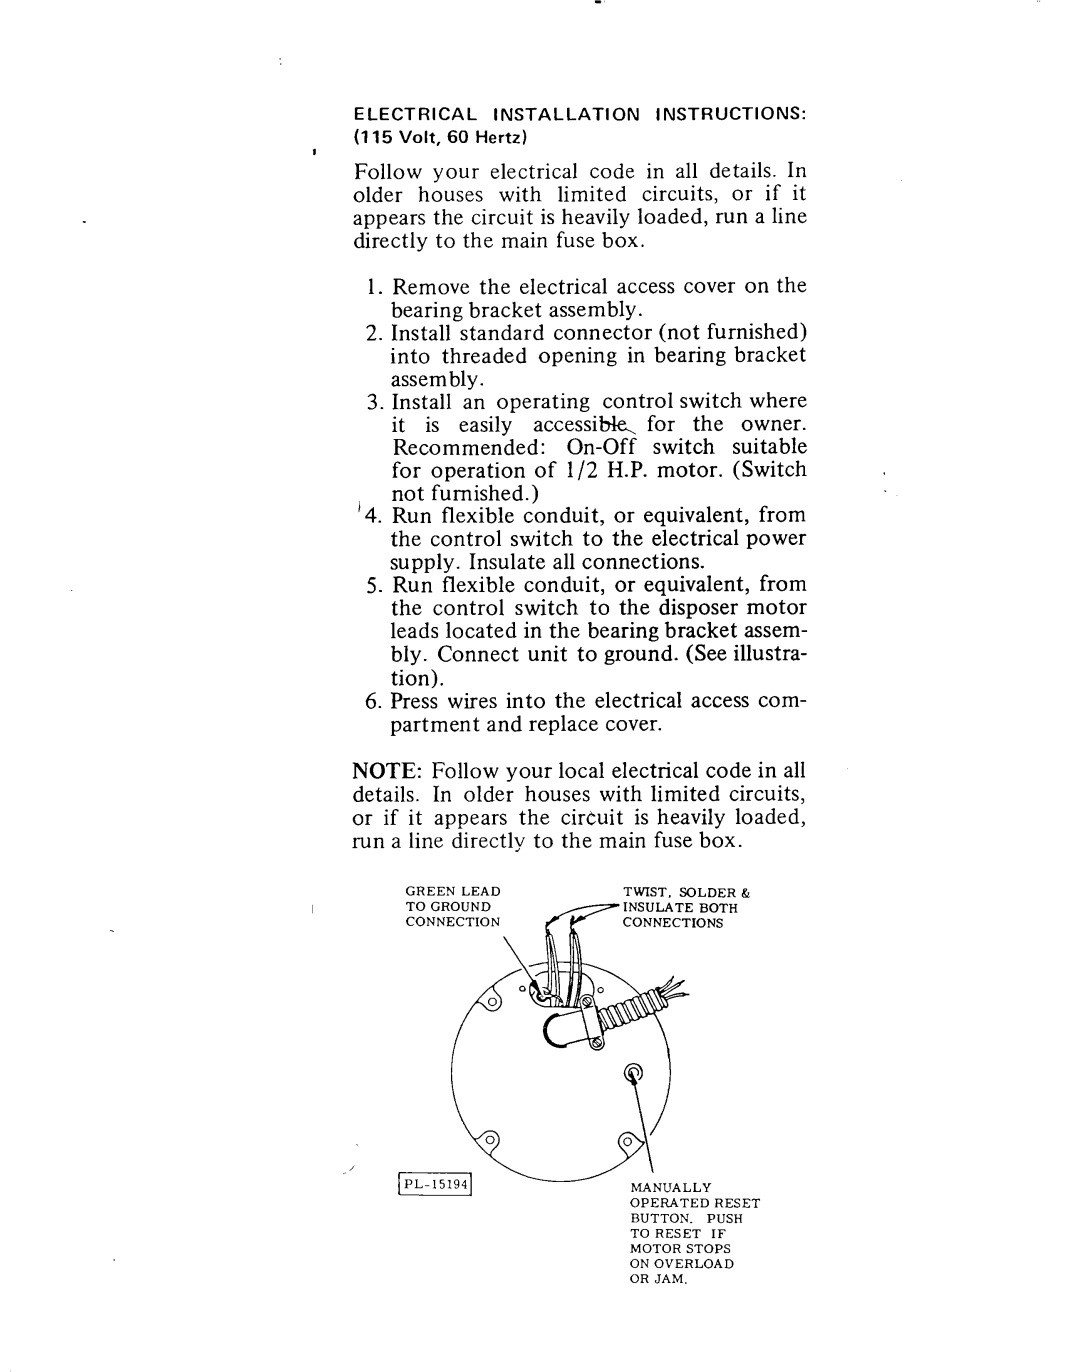 KitchenAid KWC-200 installation instructions Remove the electrical access cover on the bearing bracket assembly 